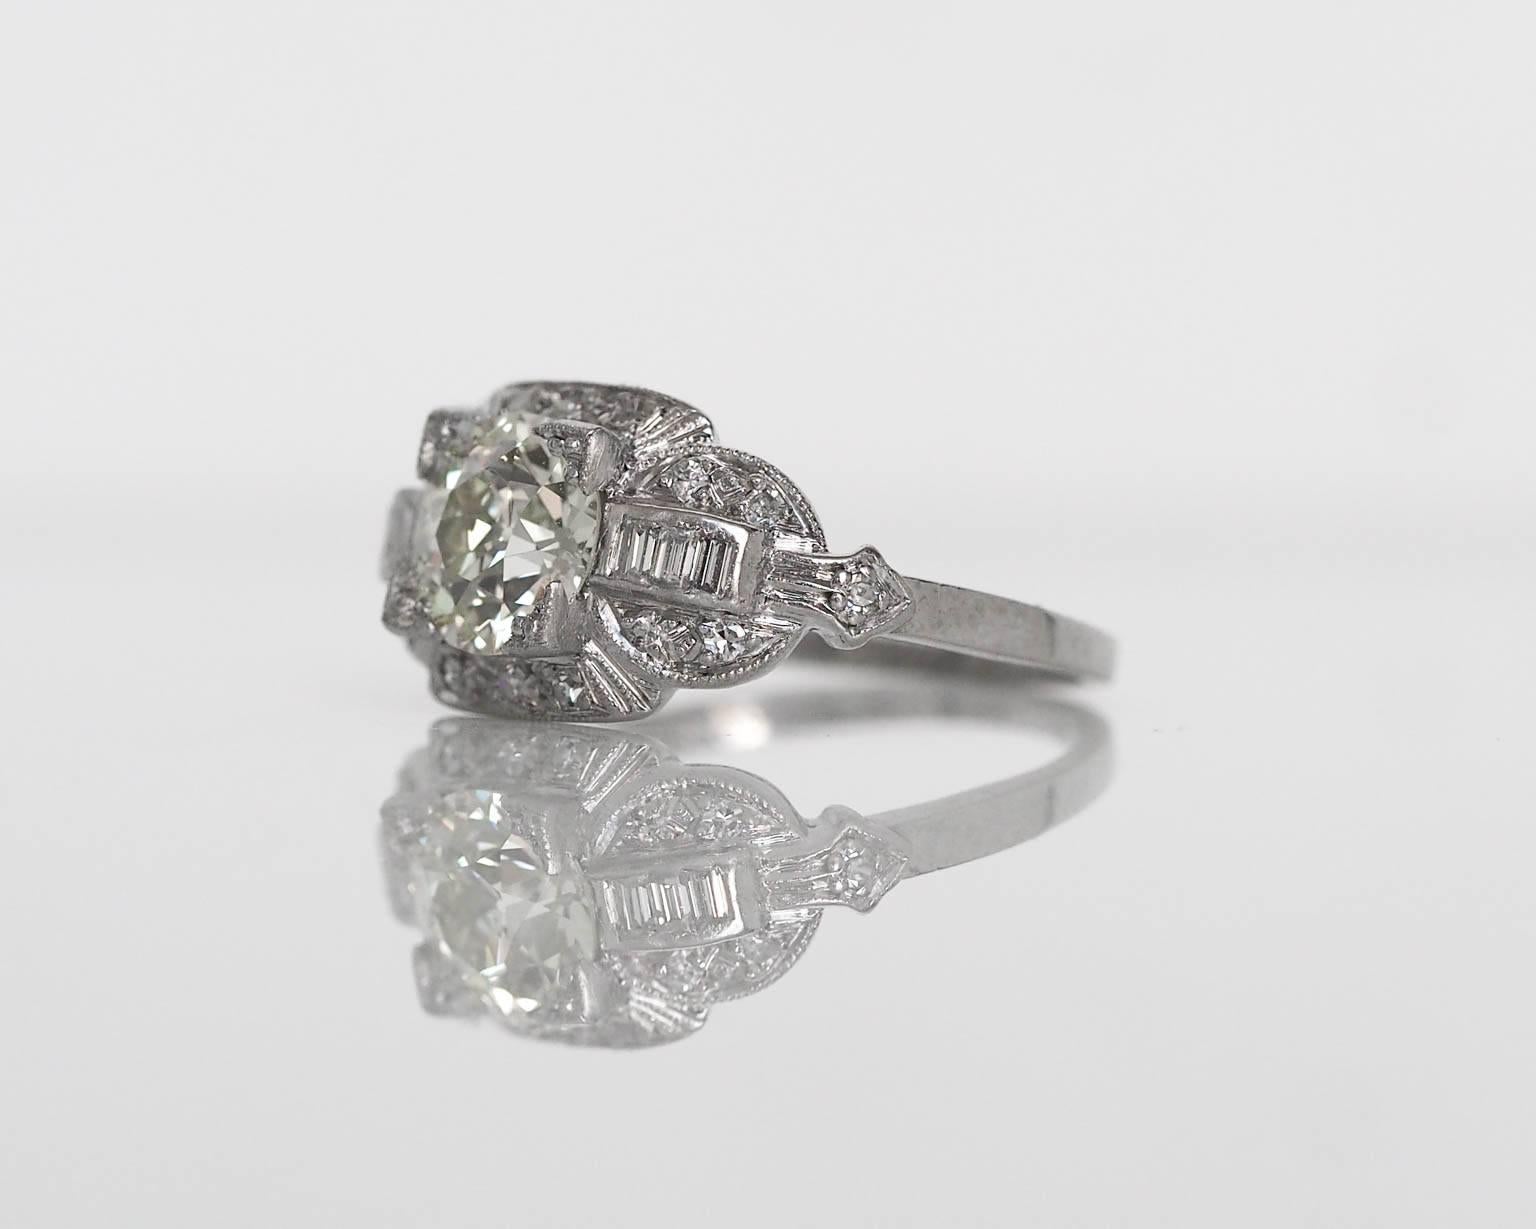 Here is a really special DECO engagement ring. The piece has many inner shank engravings and hallmarks, which really is rare to find in complete intact at this stage! Signed 